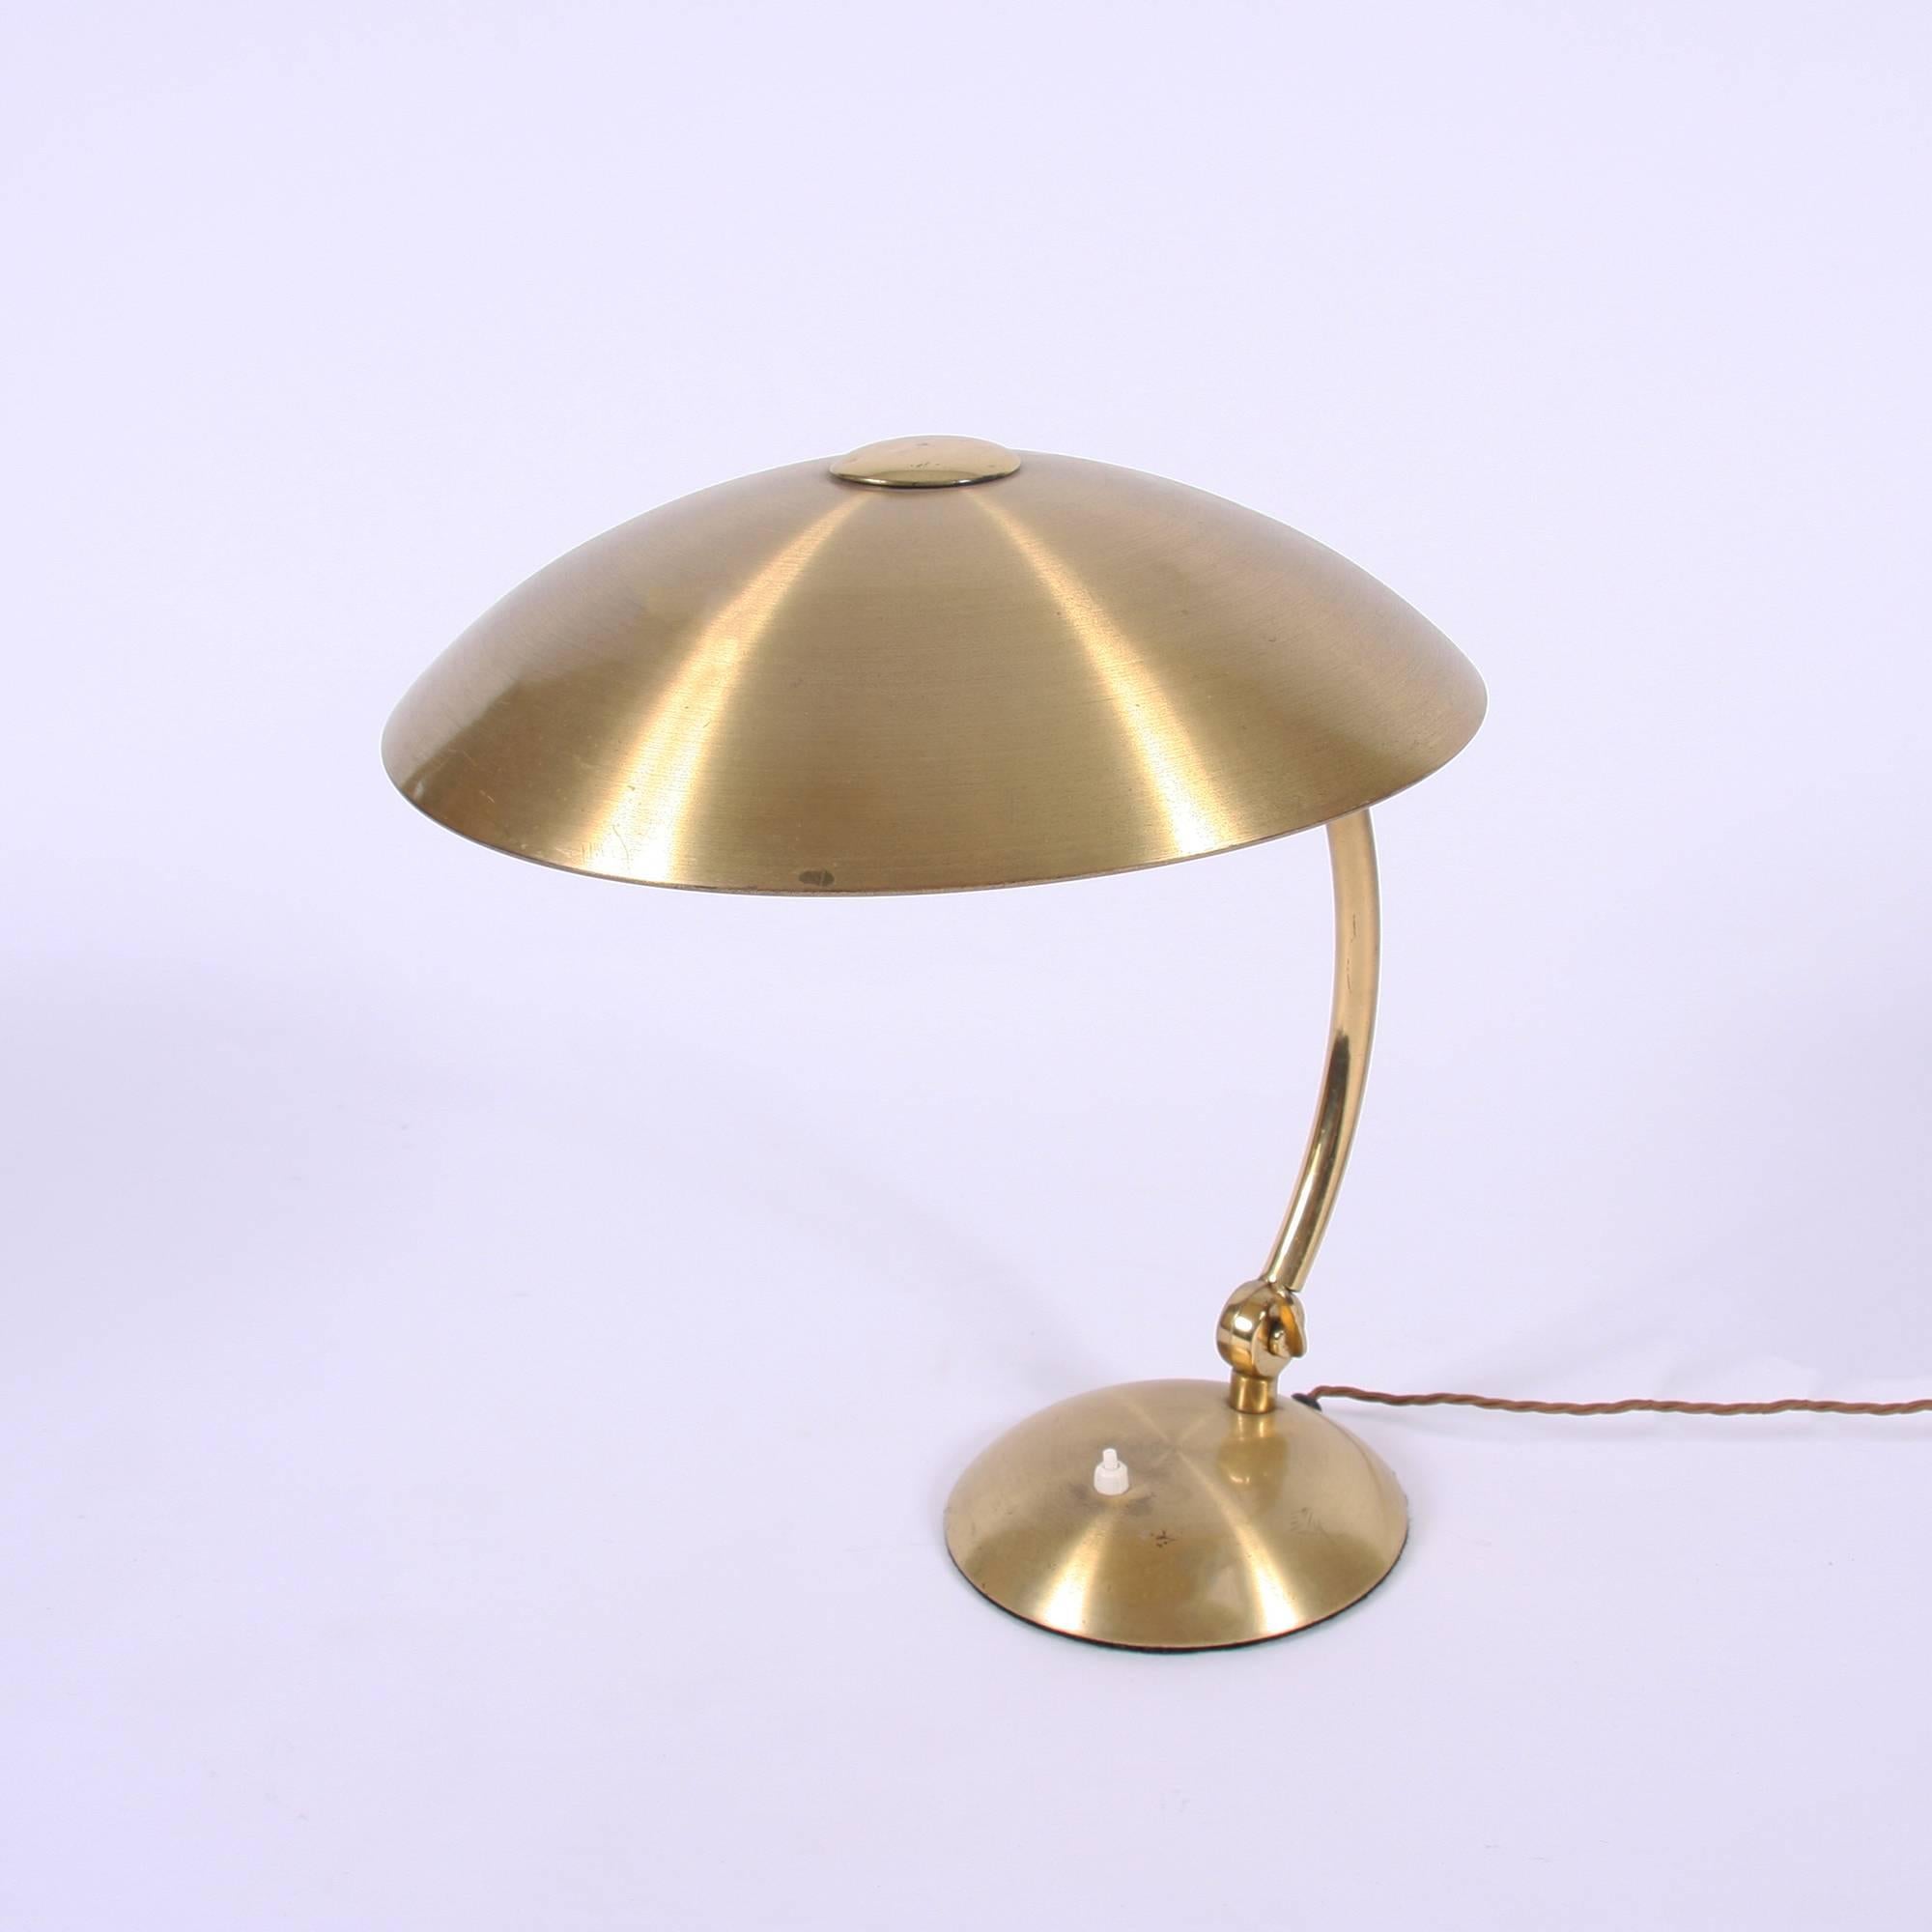 A stunning Mid-Century French brass lamp with a 'mushroom' shade also in brass. Adjustable angles and fully re-wired.